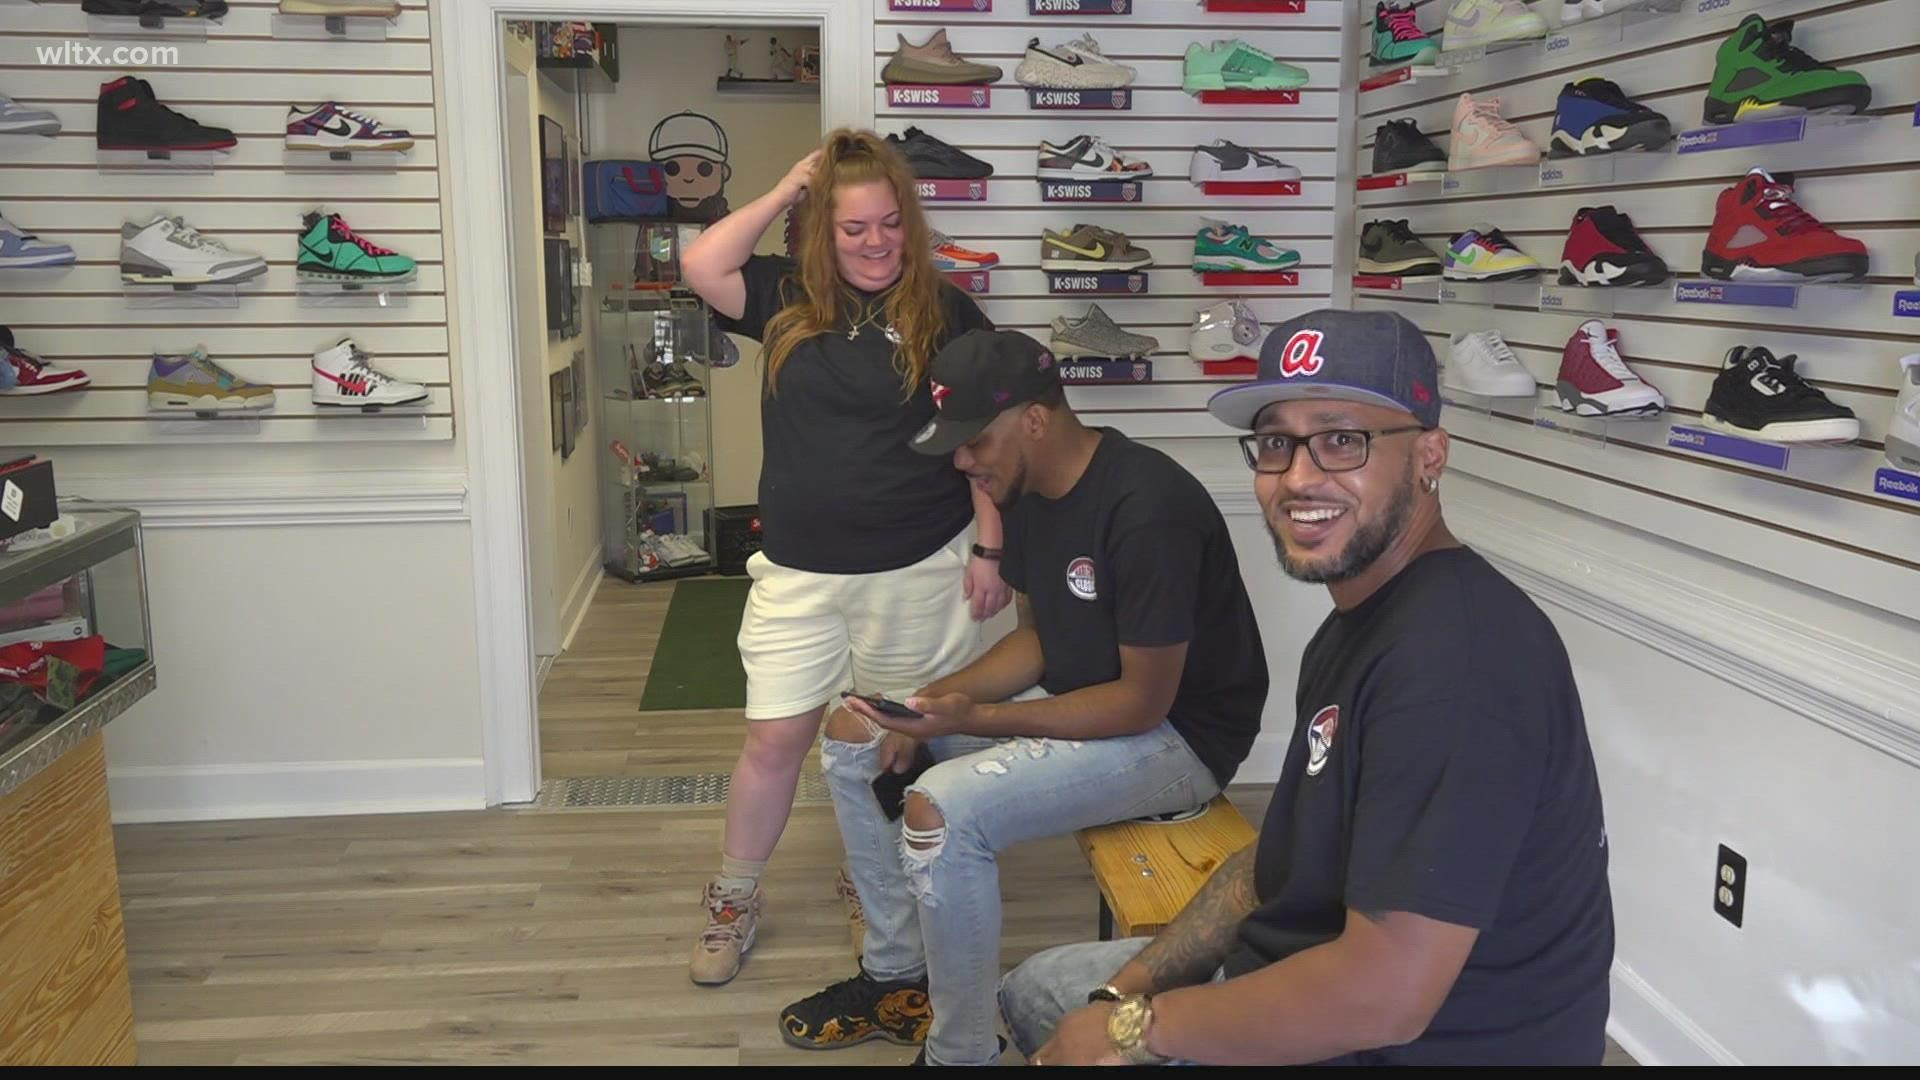 A Columbia native has turned his love for shoes into a small business he hopes will have a positive impact on the community.